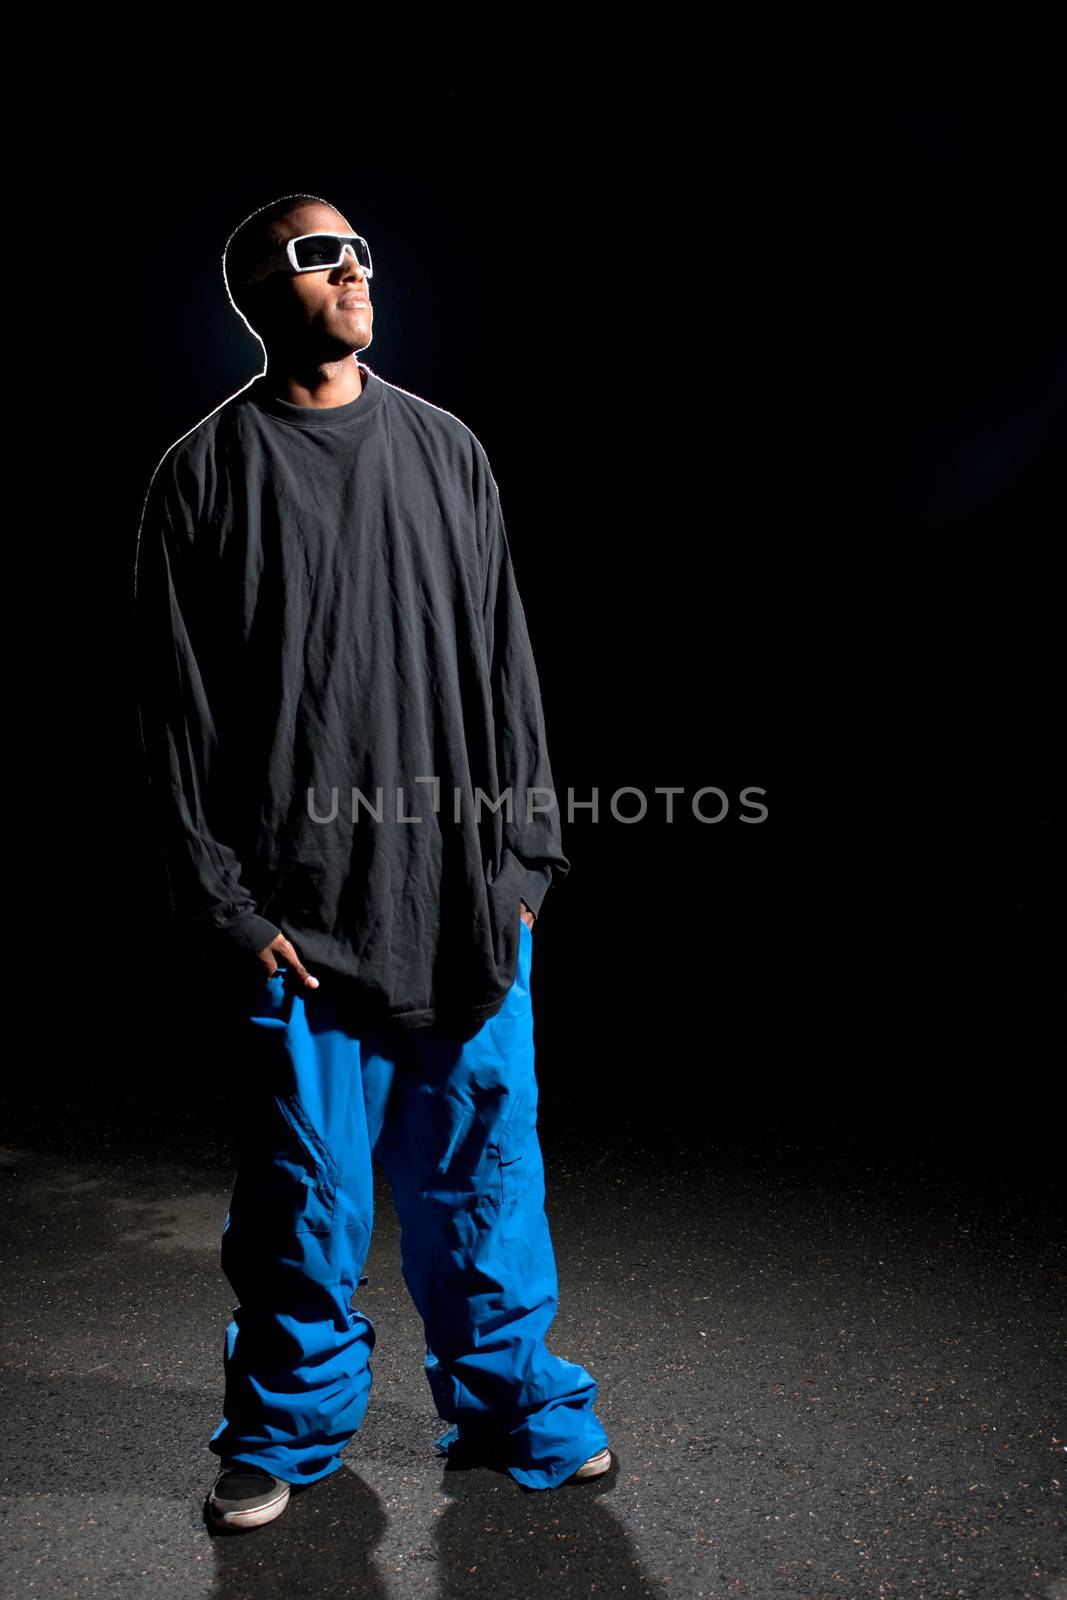 African American young man wearing baggy winter sports clothing posing under dramatic lighting with lens flare.